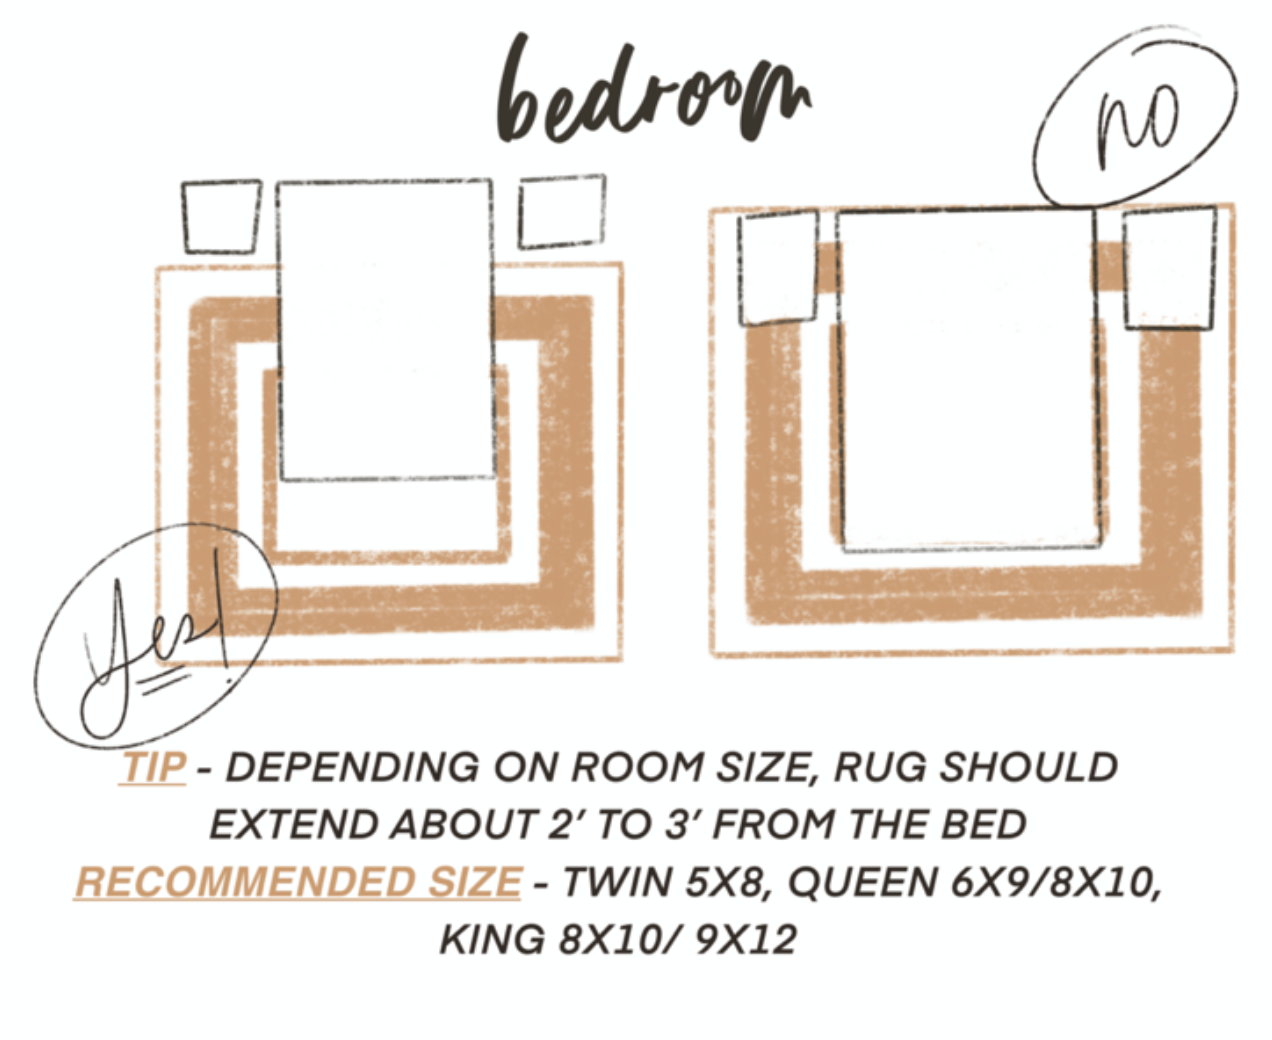 Size Rug Do You Use Under A Queen Bed, What Size Rug Should You Put Under A Queen Bed